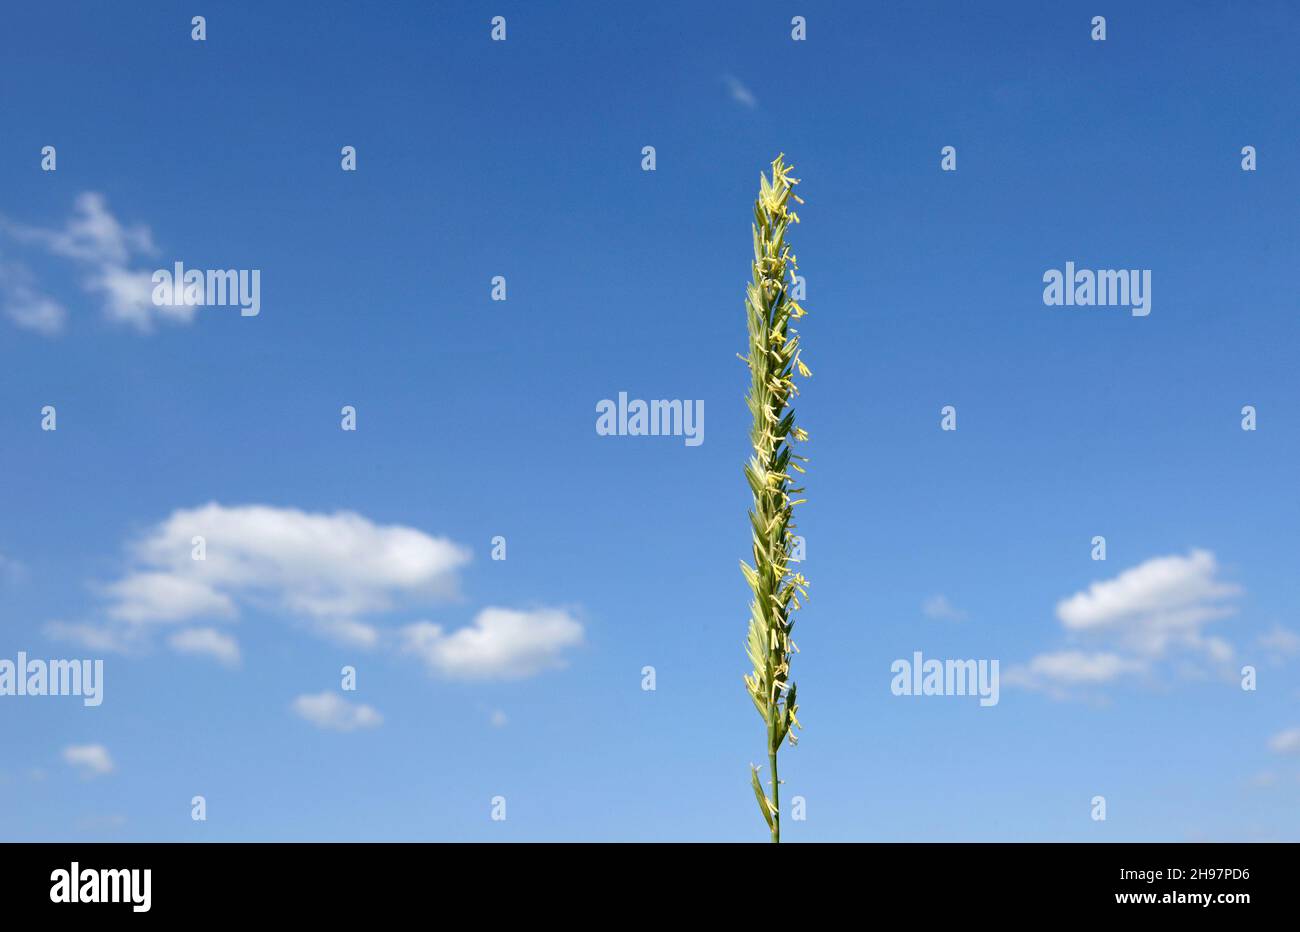 A single spike of grass flowers points up towards the blue sky in the Avon gorge, near Bristol, UK Stock Photo